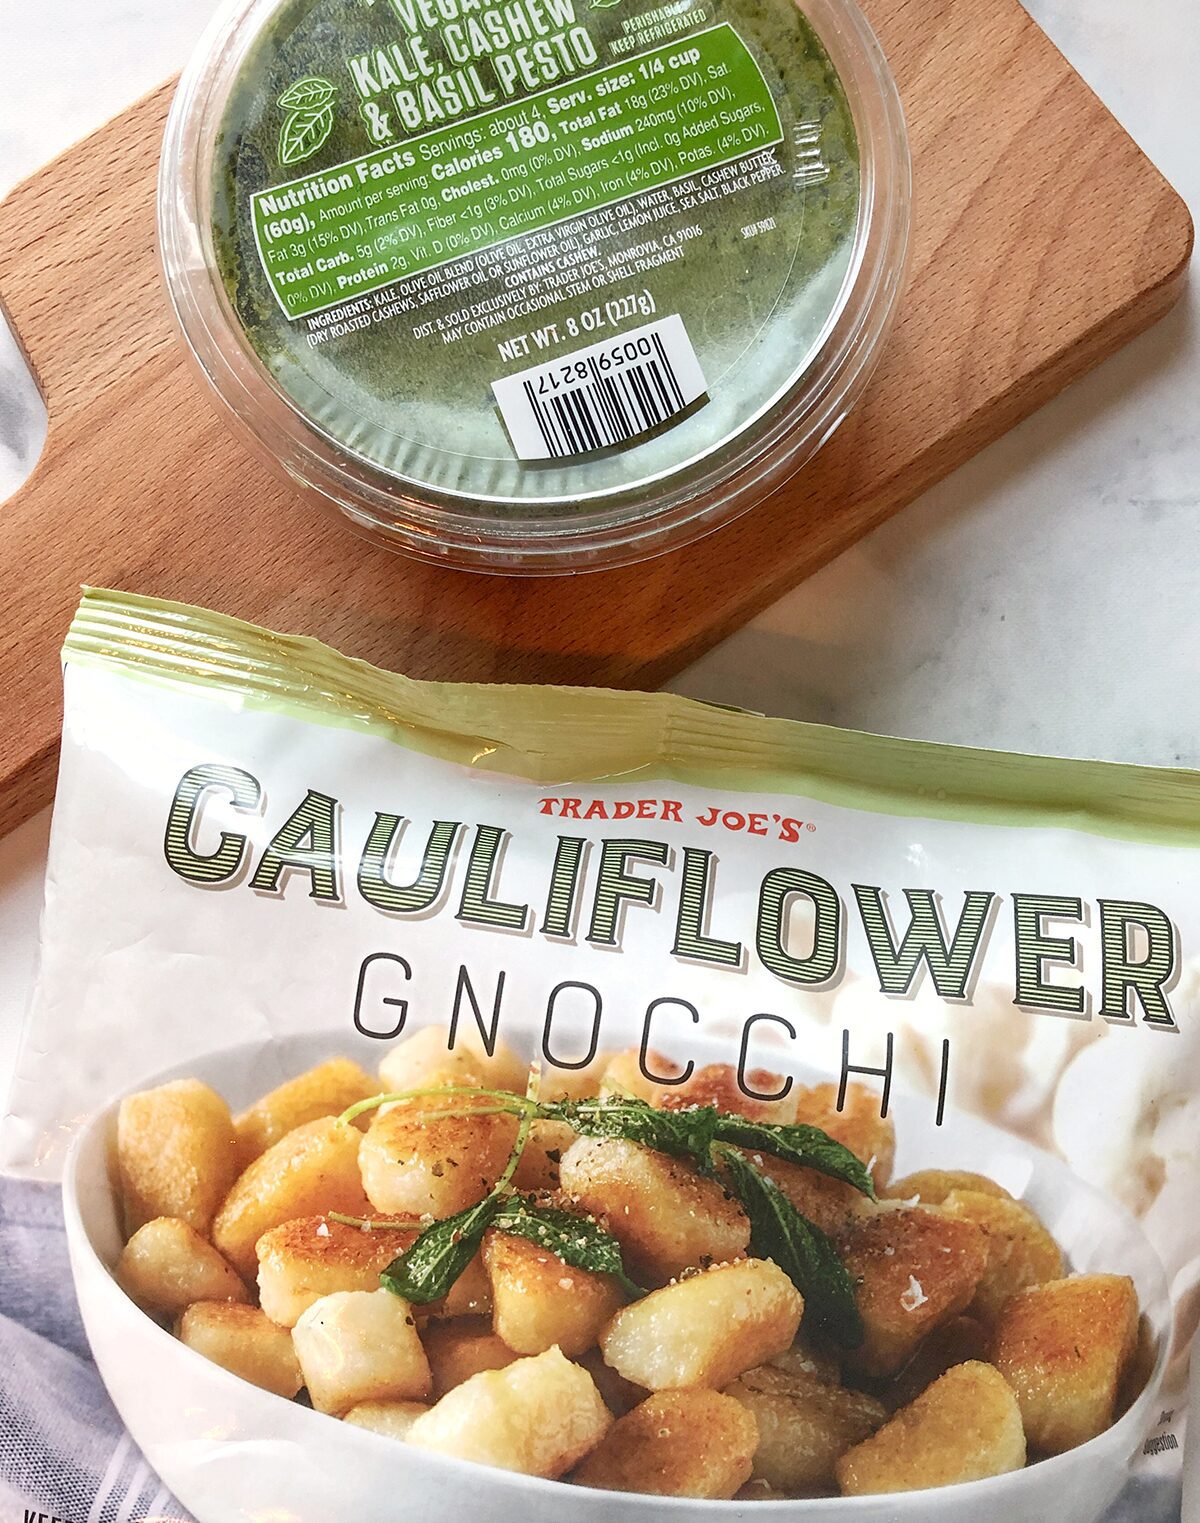 A package of Trader Joe's cauliflower gnocchi and a container of pesto.